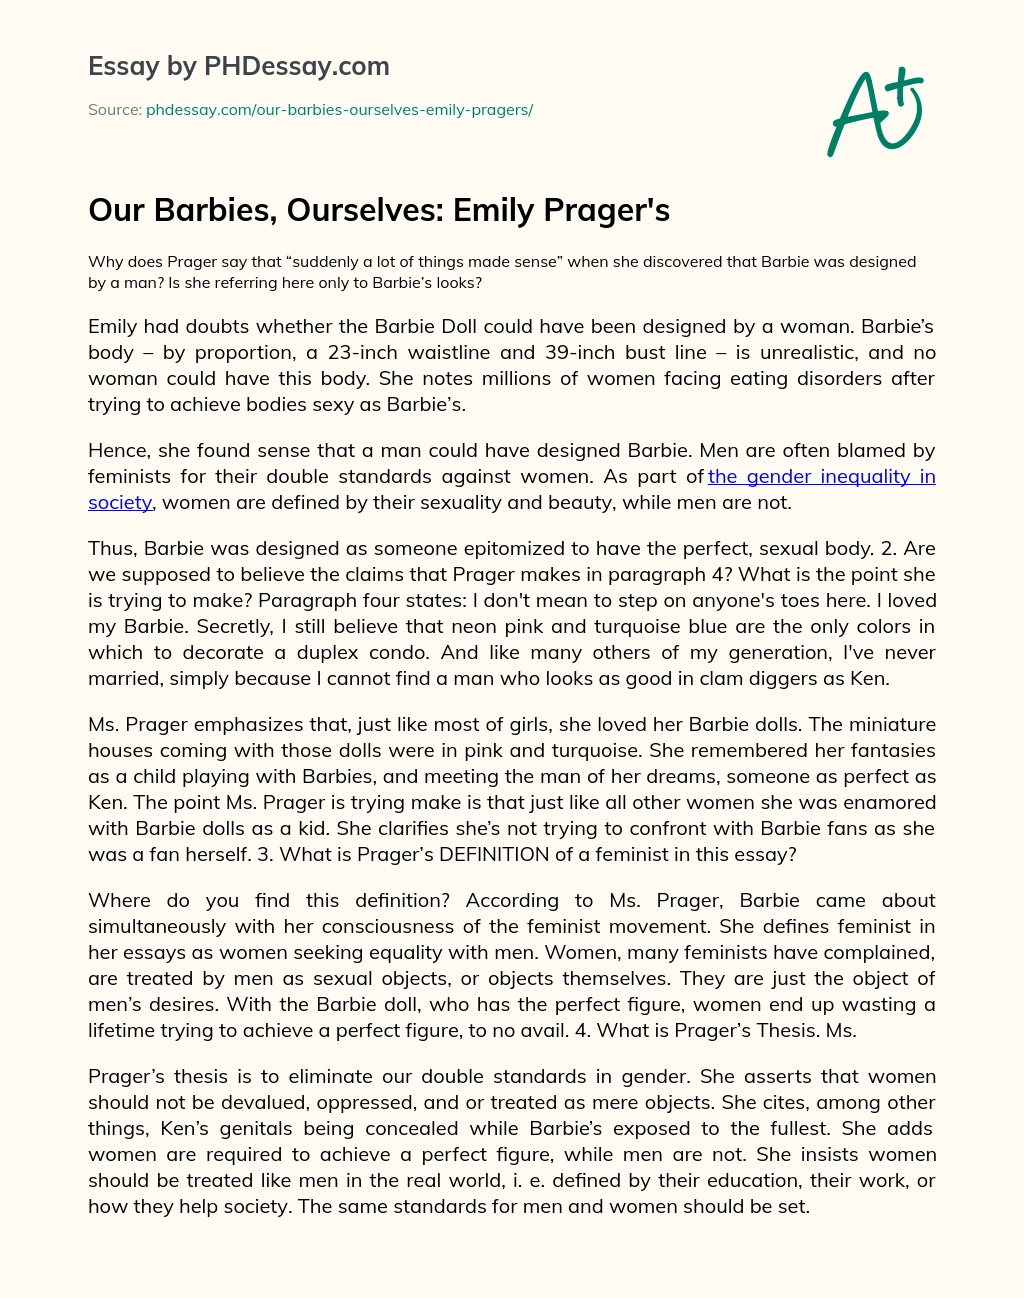 Our Barbies, Ourselves: Emily Prager’s essay